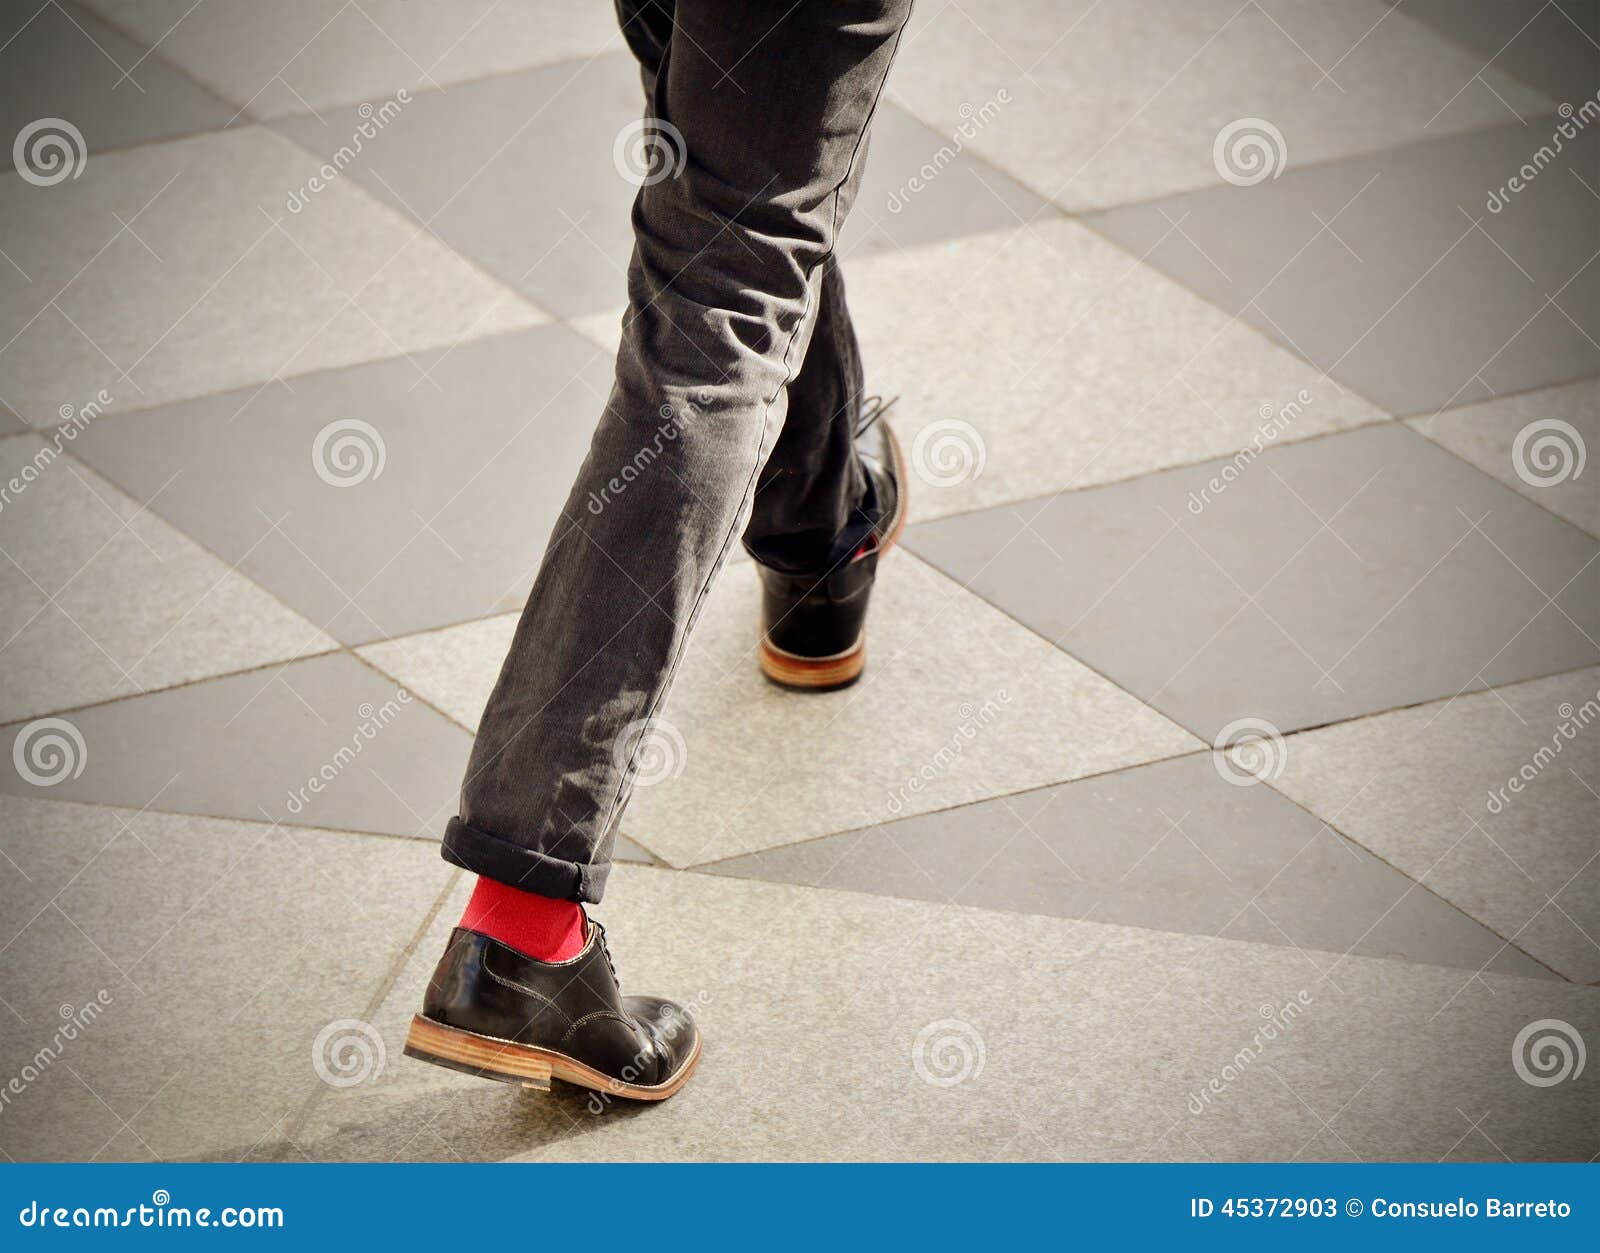 Man with red socks stock image. Image of legs, shoes - 45372903